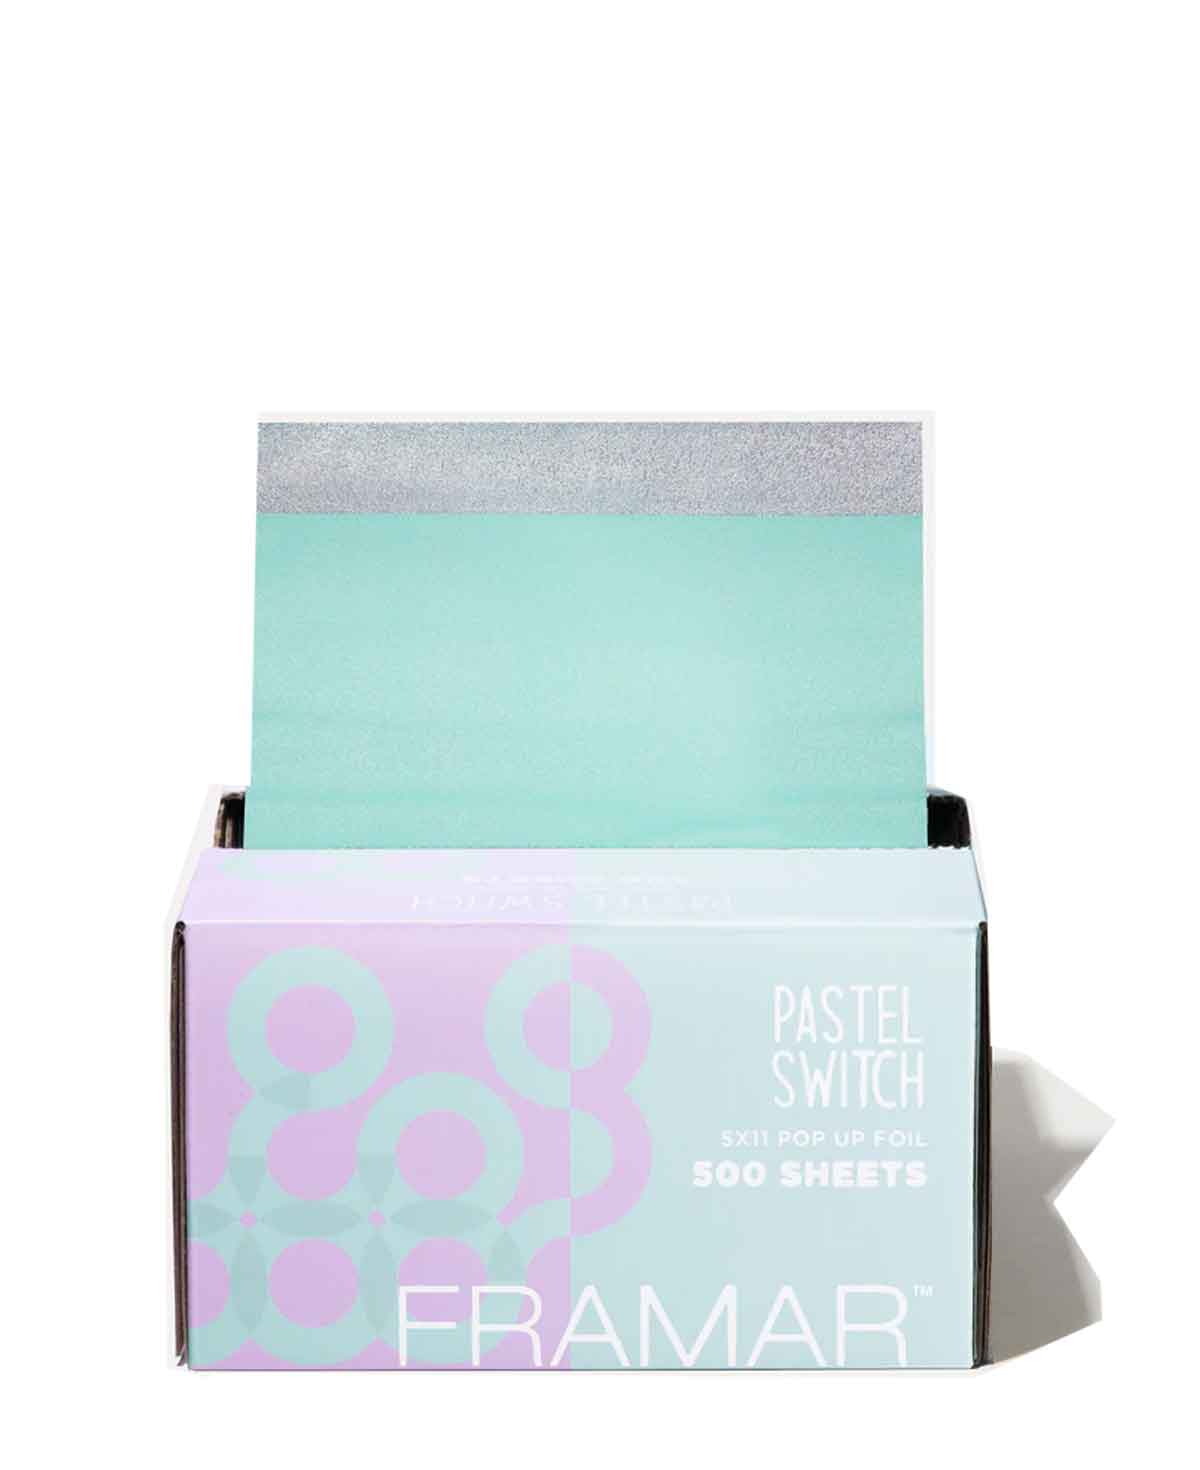 Framar 5x11 Pop-Ups Pastel Switch 500 Sheets - Limited Edition 